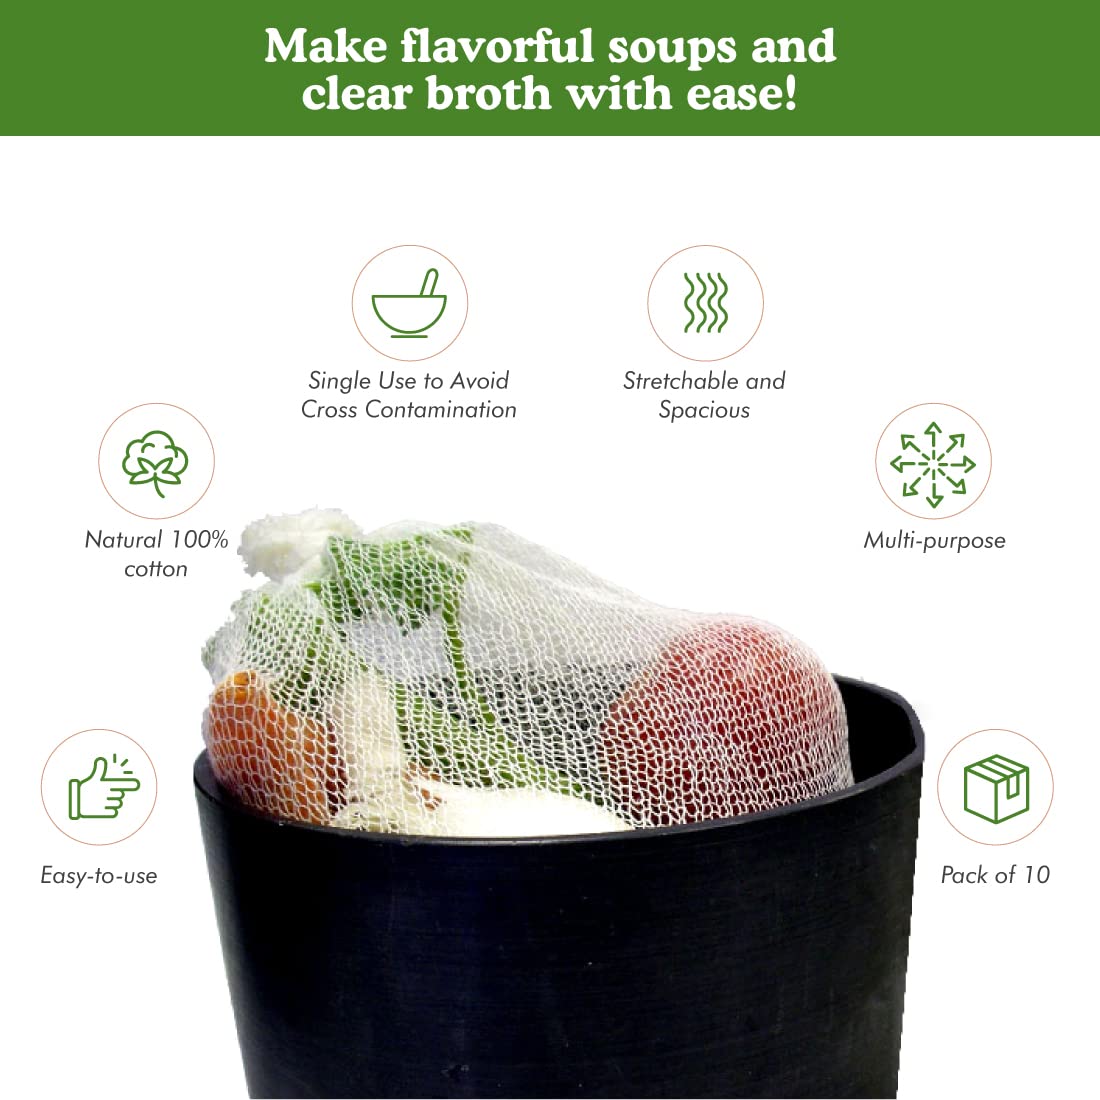 Regency Wraps, Soup Sock, Cotton Mesh Bags for Making Clear Flavorful Broth and Soups, Natural 100% Cotton, Measures 24 inches, Pack of 10